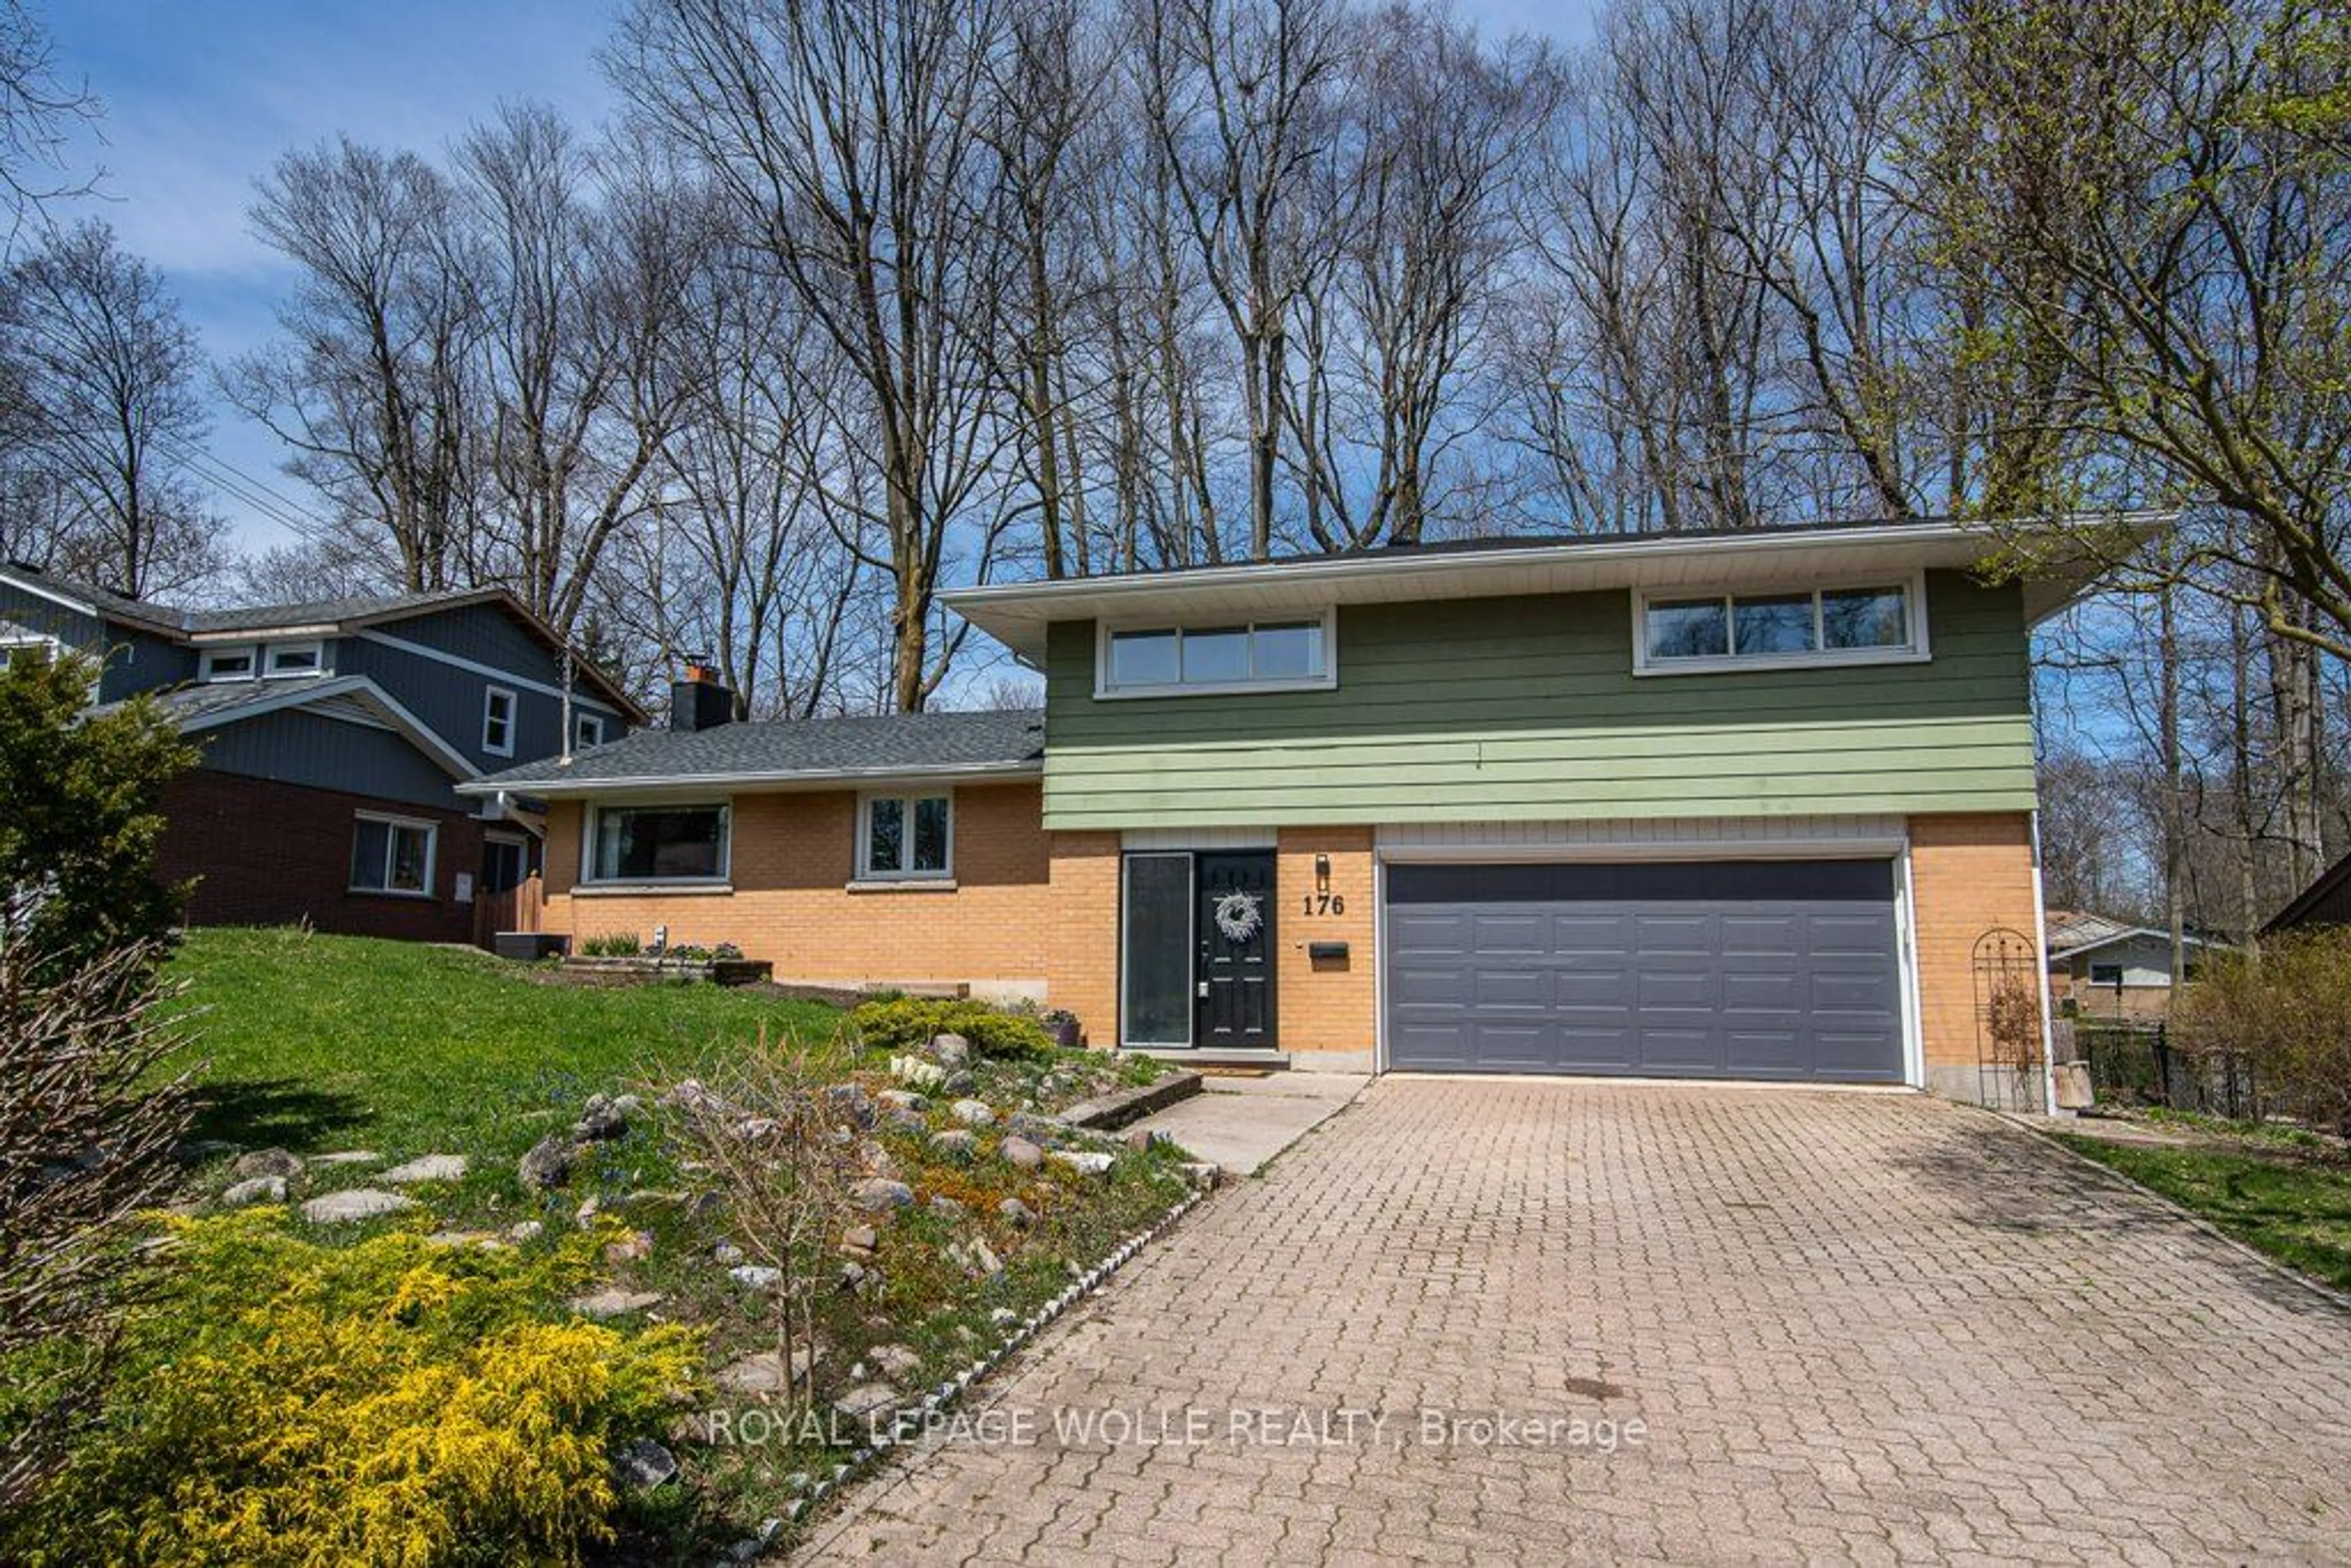 Home with brick exterior material for 176 Greenbrook Dr, Kitchener Ontario N2M 4J7